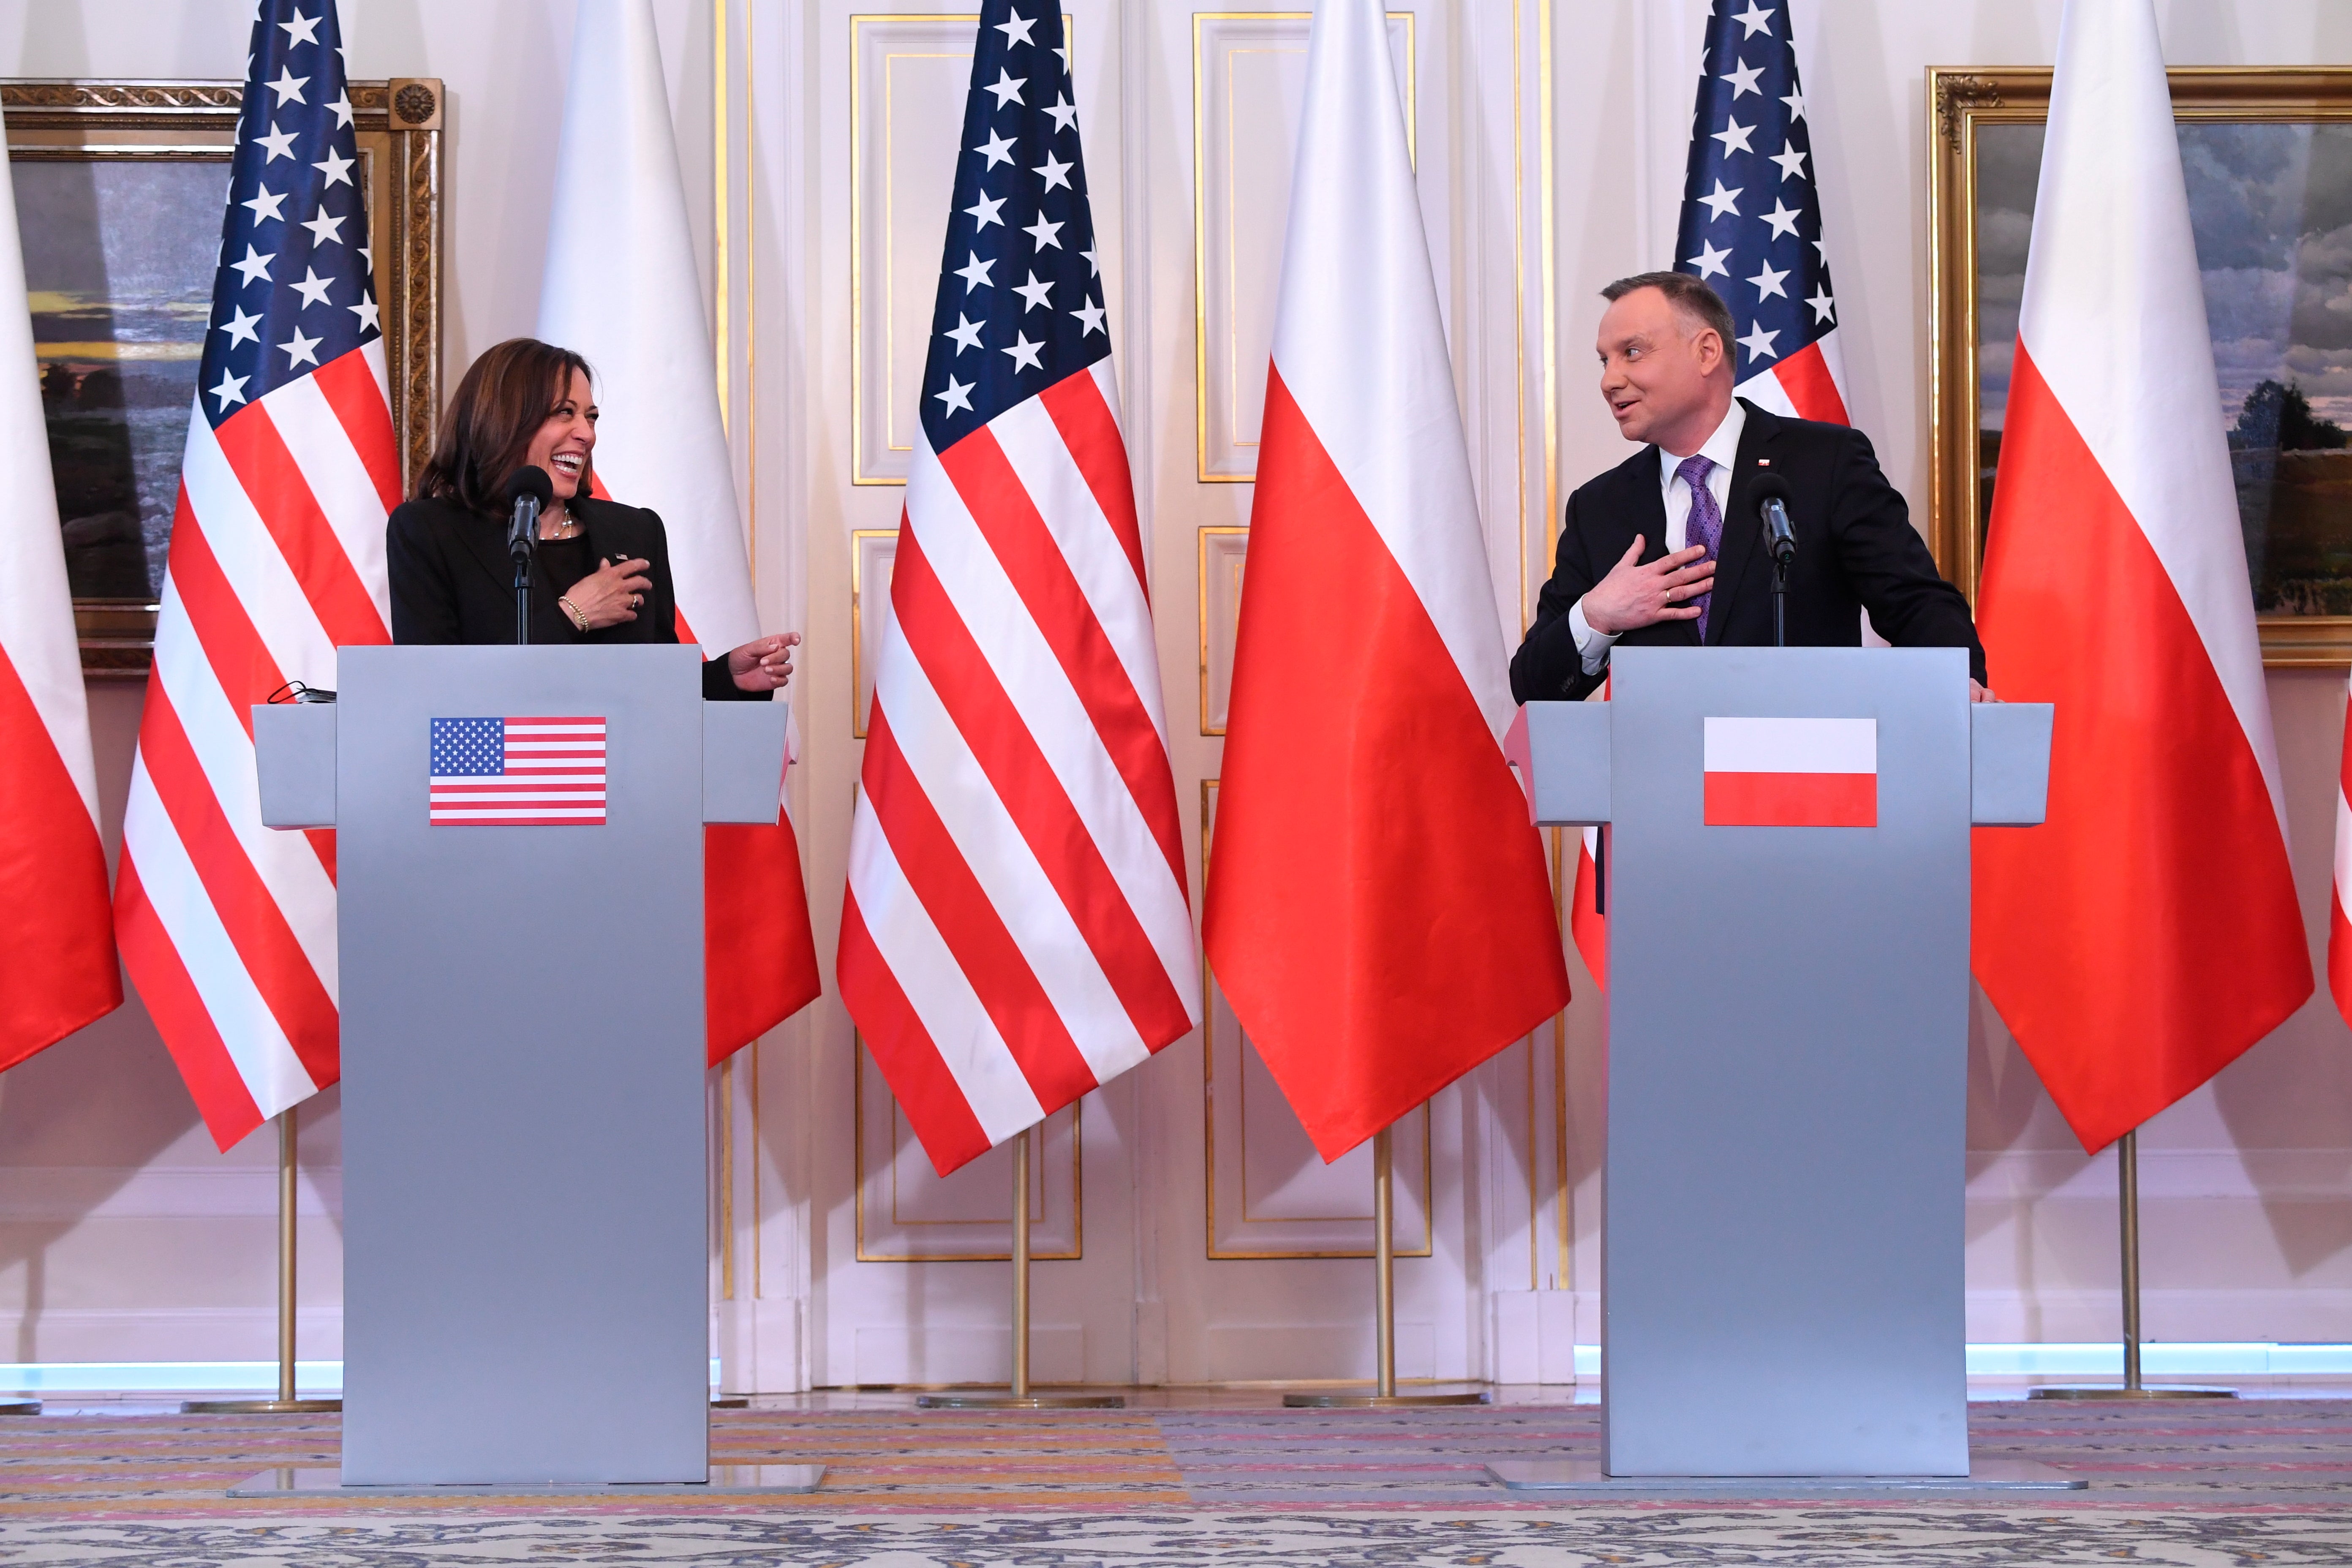 Polish President Andrzej Duda, right, and US Vice President Kamala Harris hold a press conference at Belwelder Palace, in Warsaw, Poland, Thursday, March 10, 2022. (Saul Loeb/Pool Photo via AP)